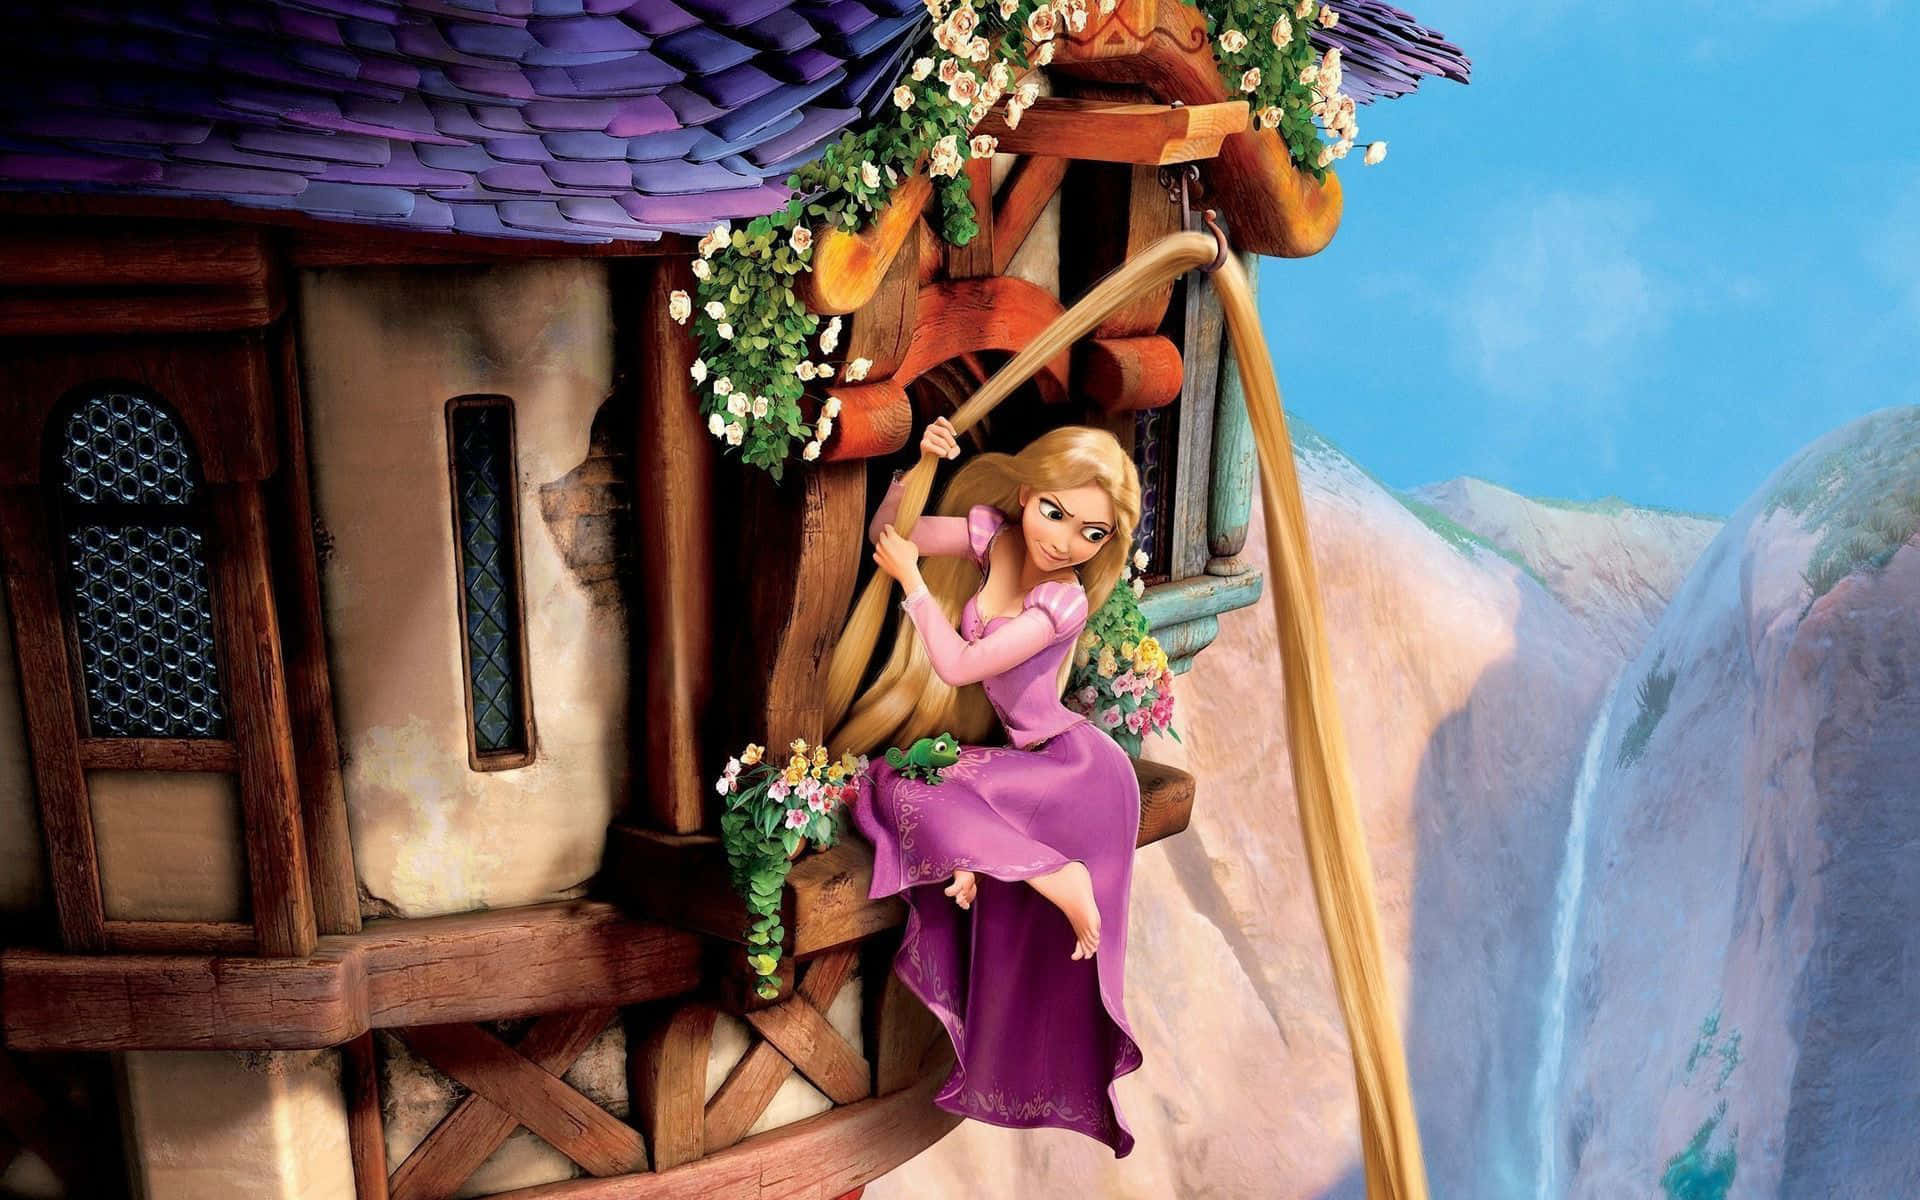 Magical Rapunzel Tower in the Enchanted Forest